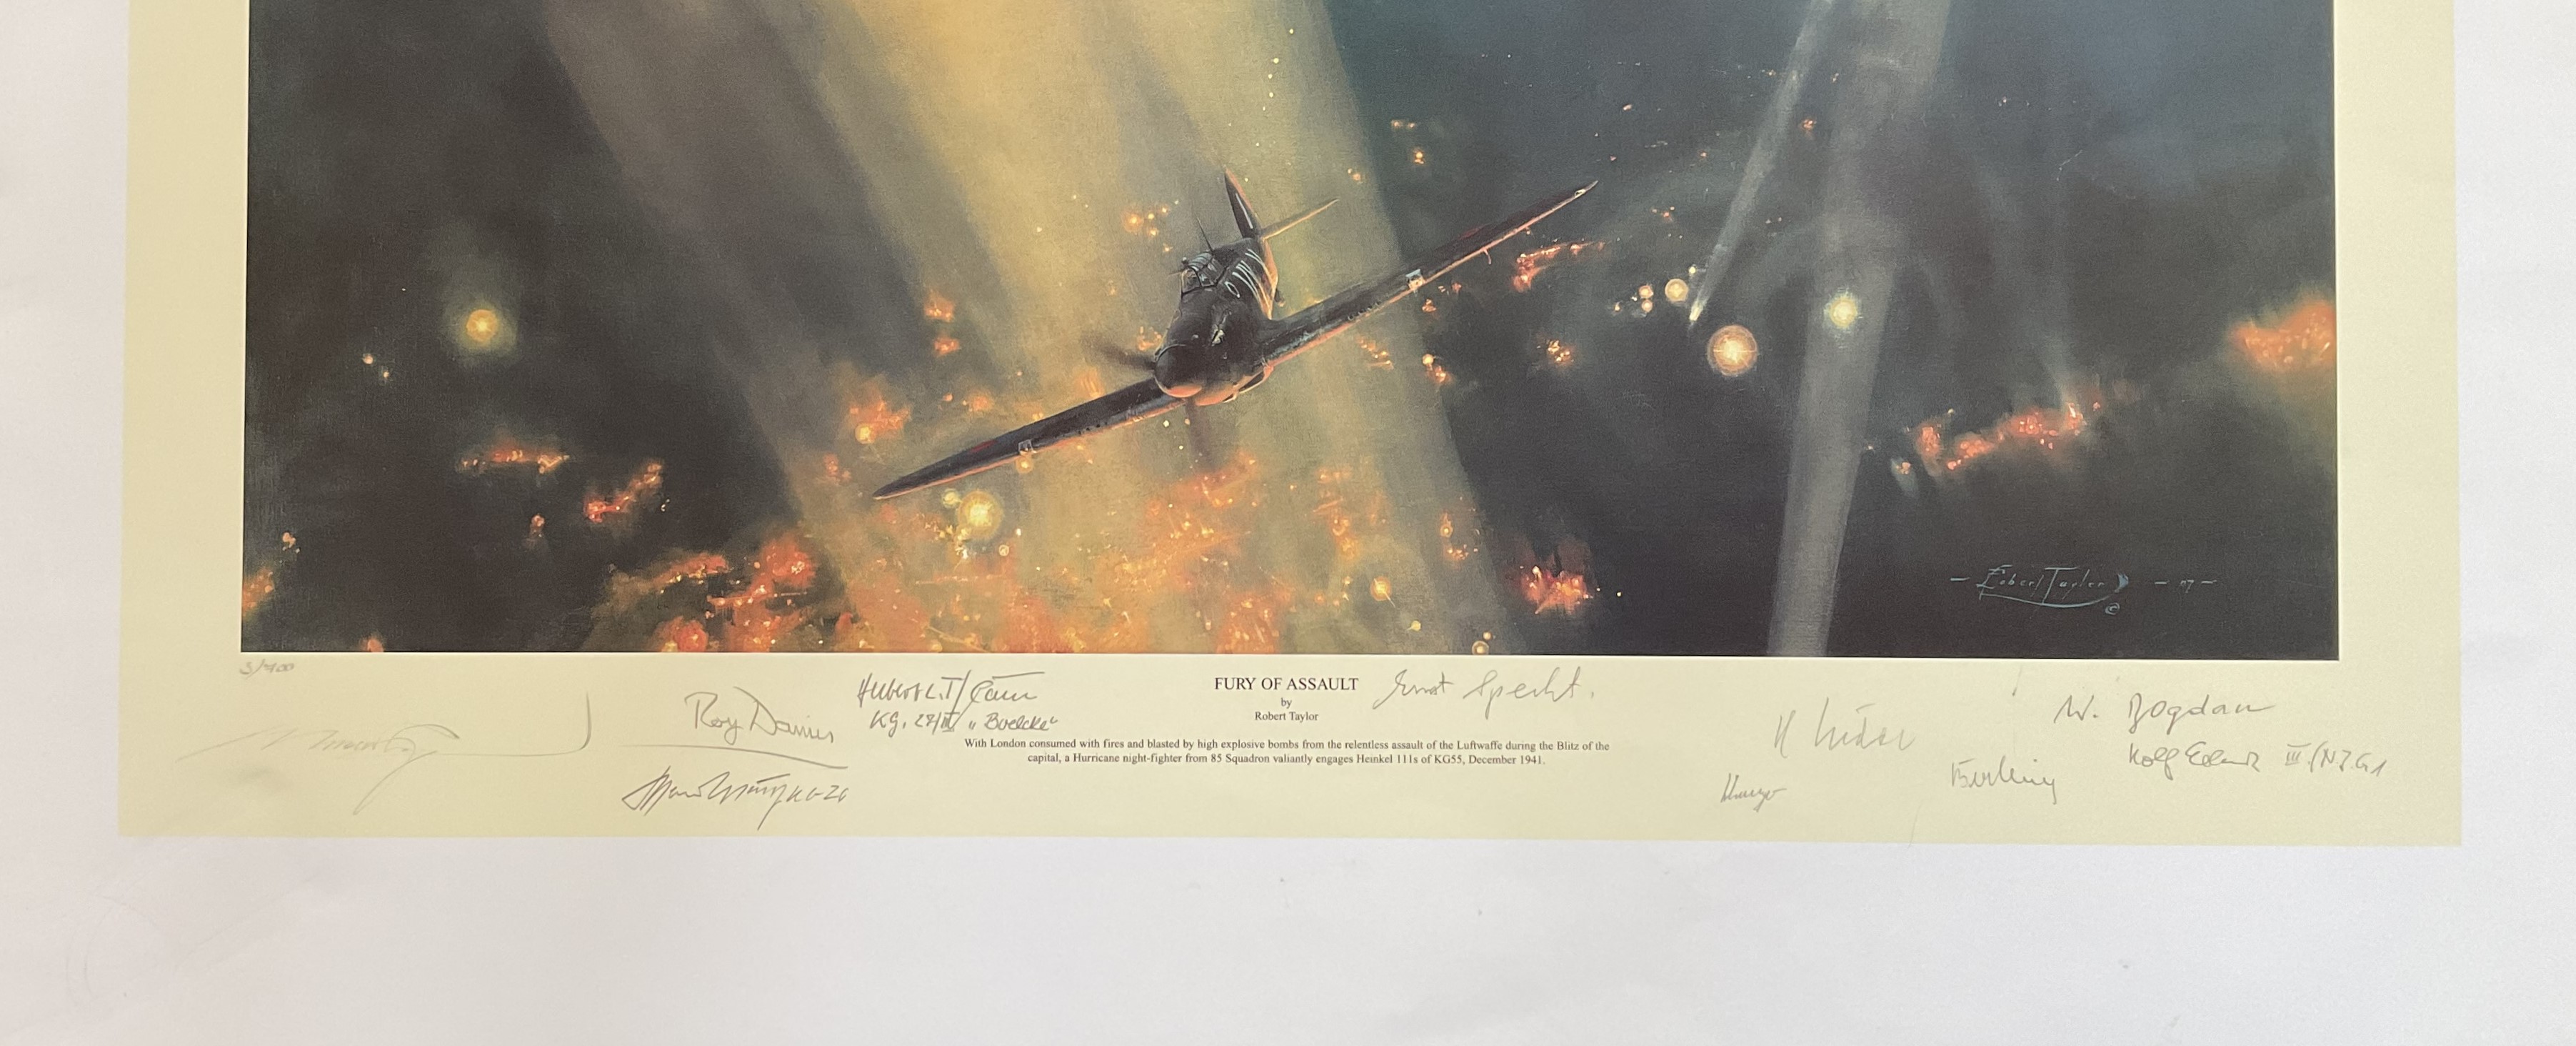 WWII Fury of Assault 29x24 inches colour print limited edition colour print 3/700 signed in pencil - Image 6 of 6